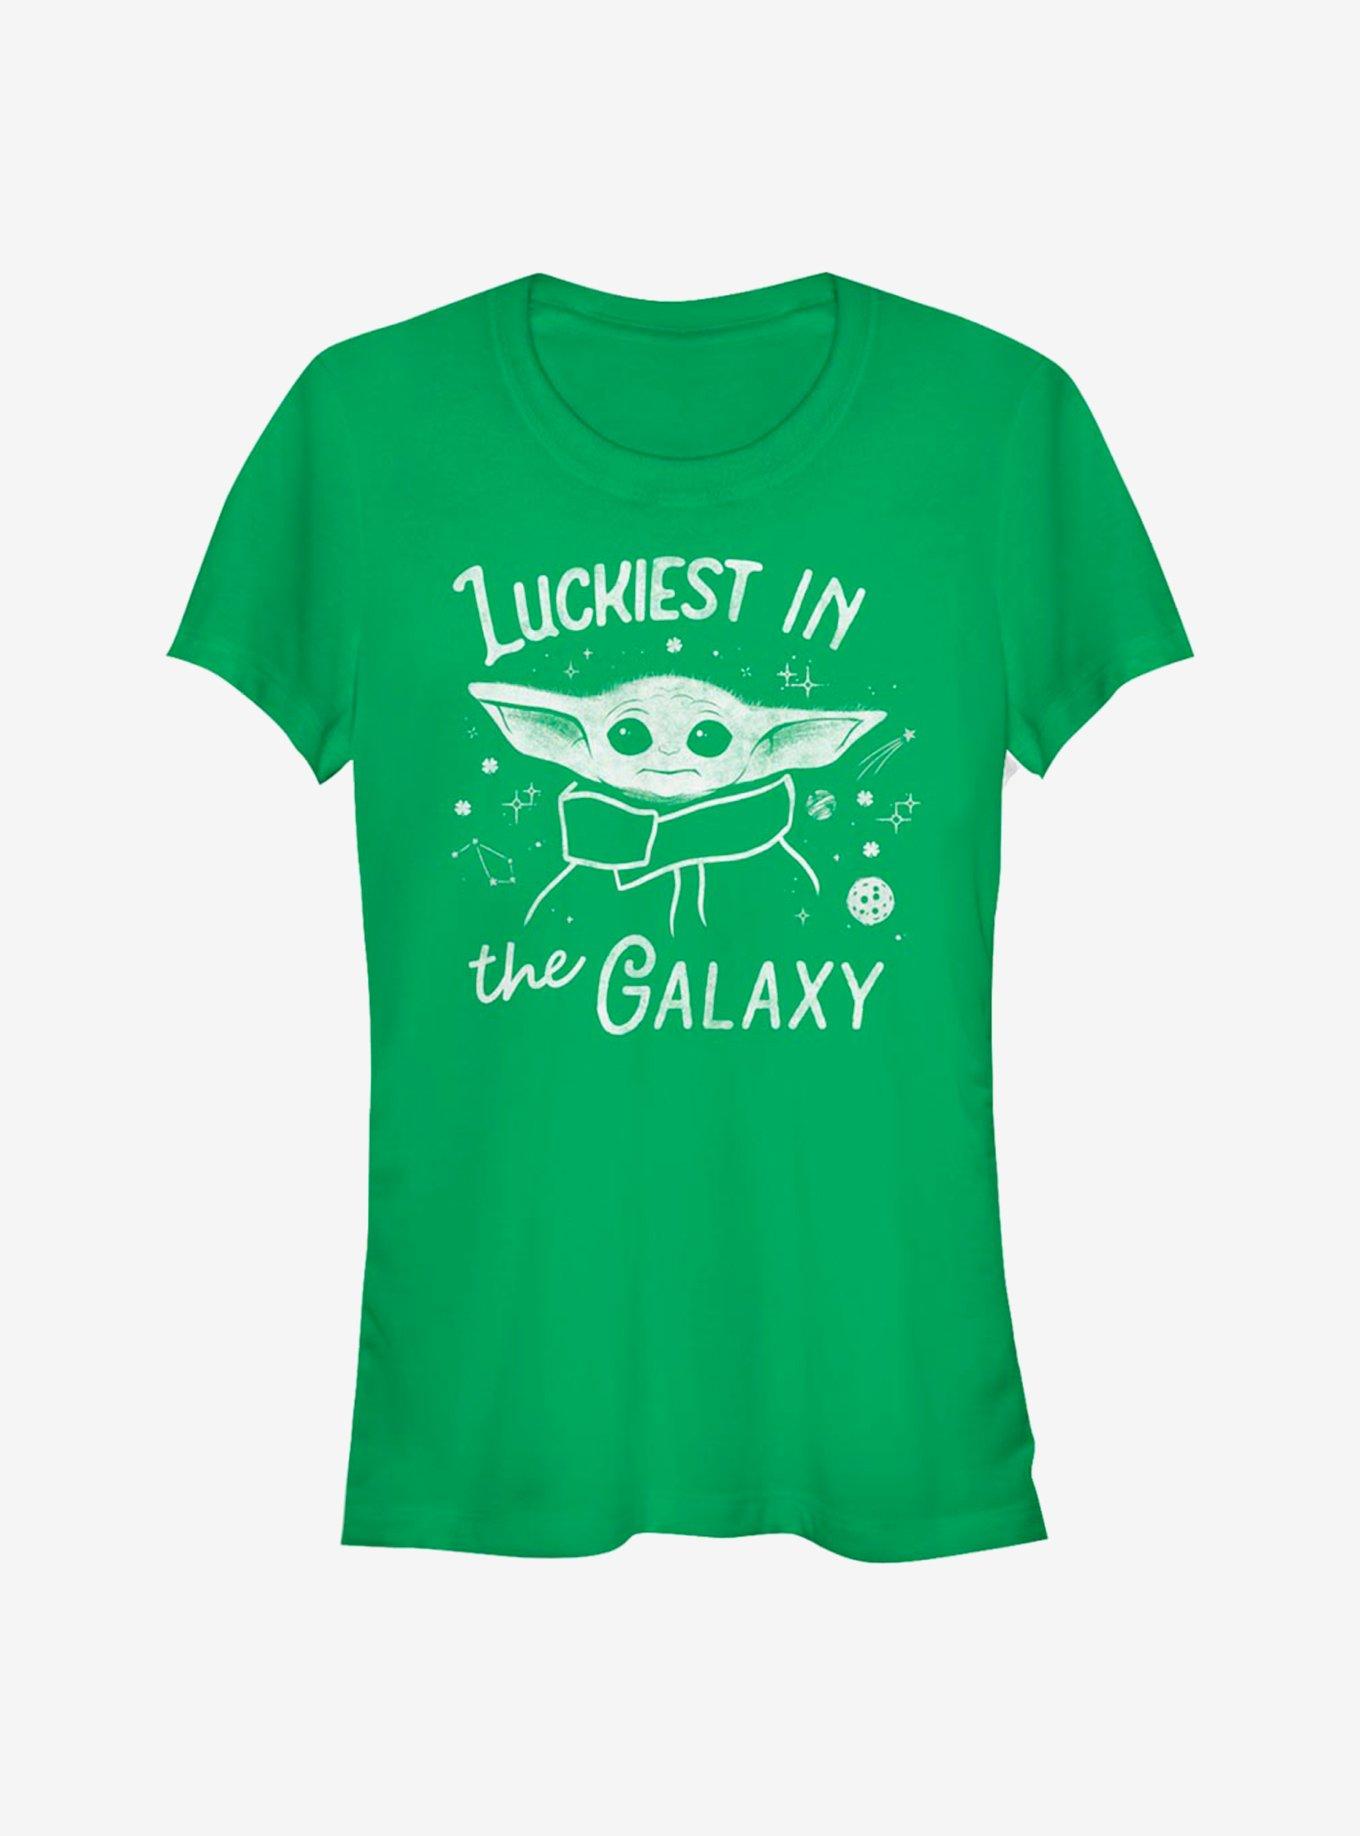 Star Wars The Mandalorian Luckiest In The Galaxy The Child Girls T-Shirt, KELLY, hi-res